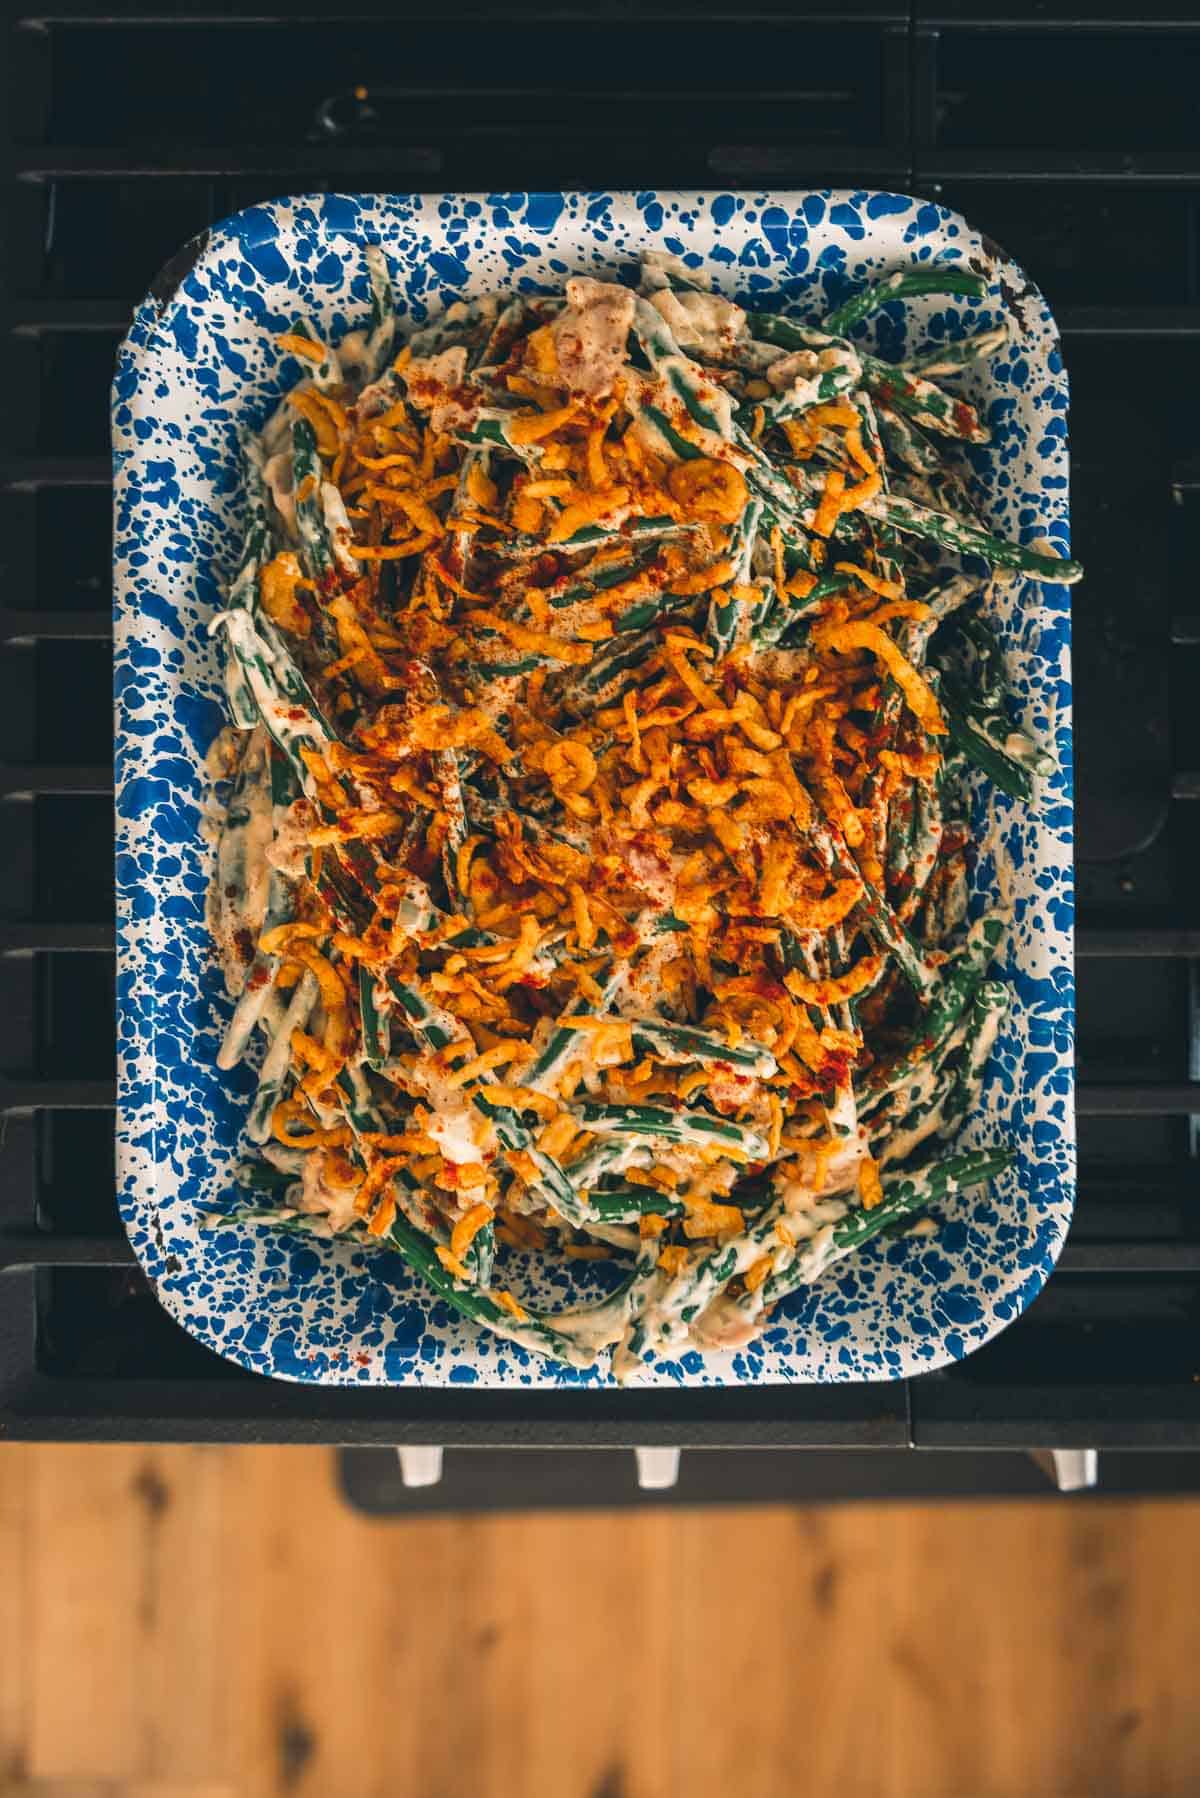 A plate of green beans on a stove top.